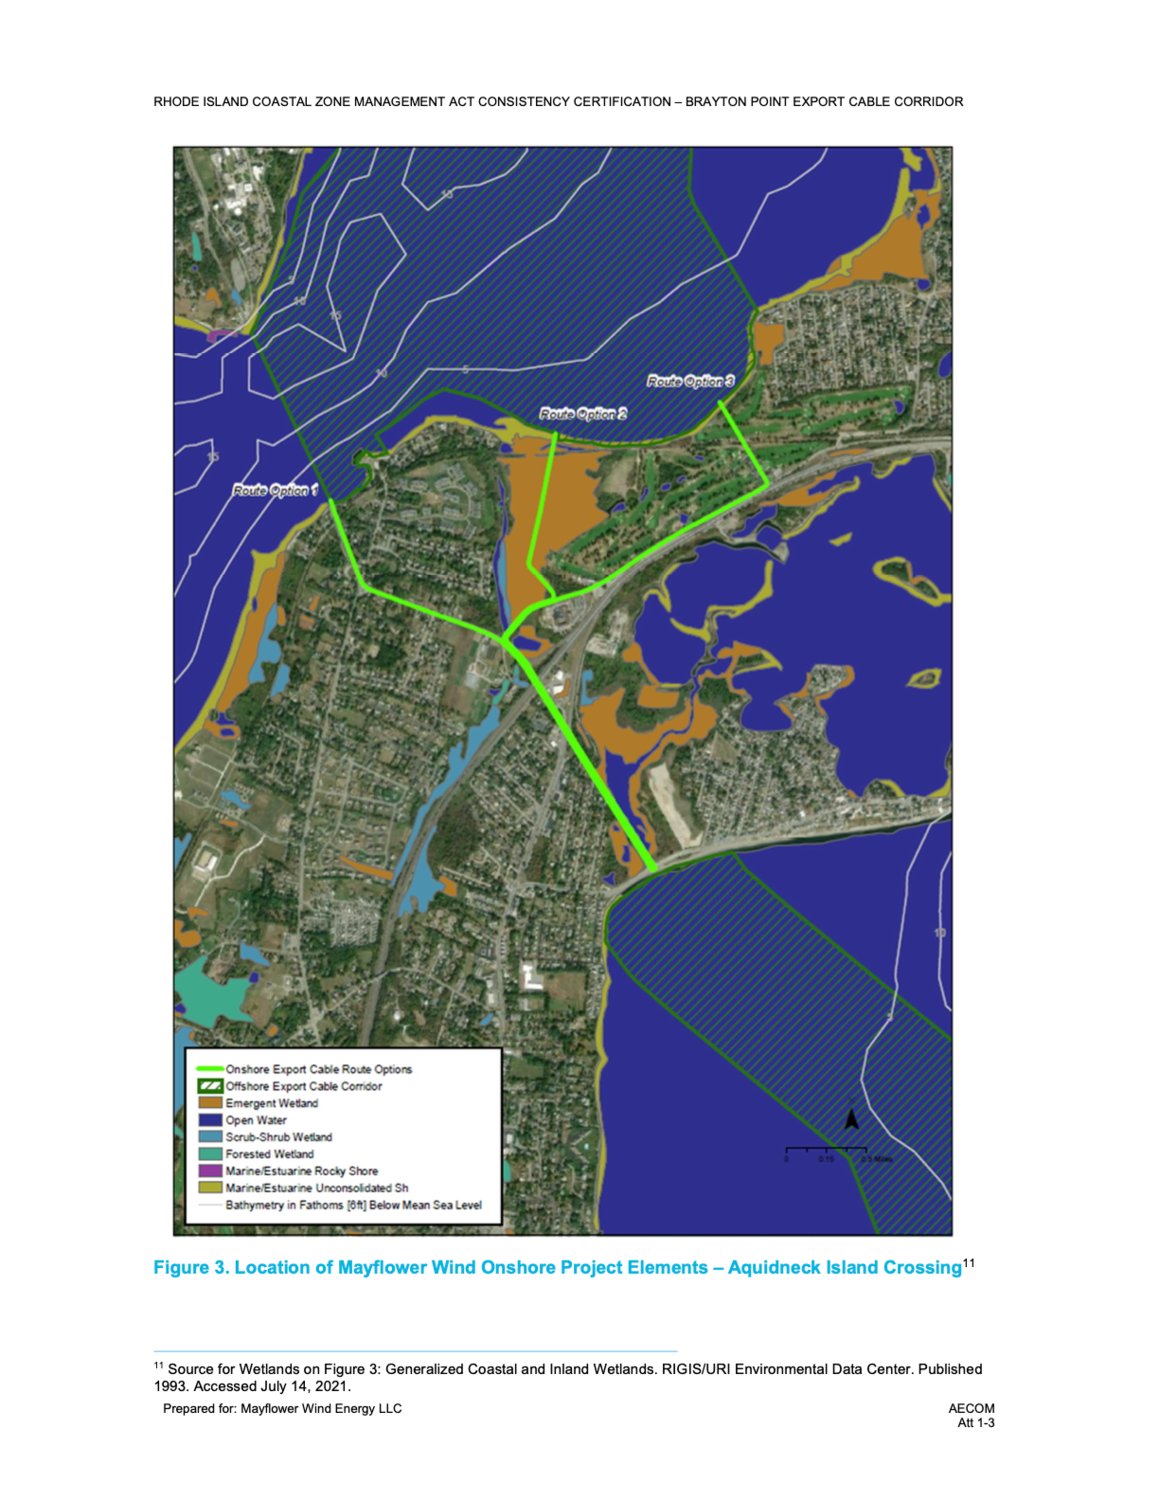 A more detailed breakdown of the land connection over Portsmouth shows three possible options, all three of which would traverse at least a portion of a DEM wildlife management area, Boyd’s Marsh. All options include direct connection through state-protected land or are within a quarter mile of protected lands.